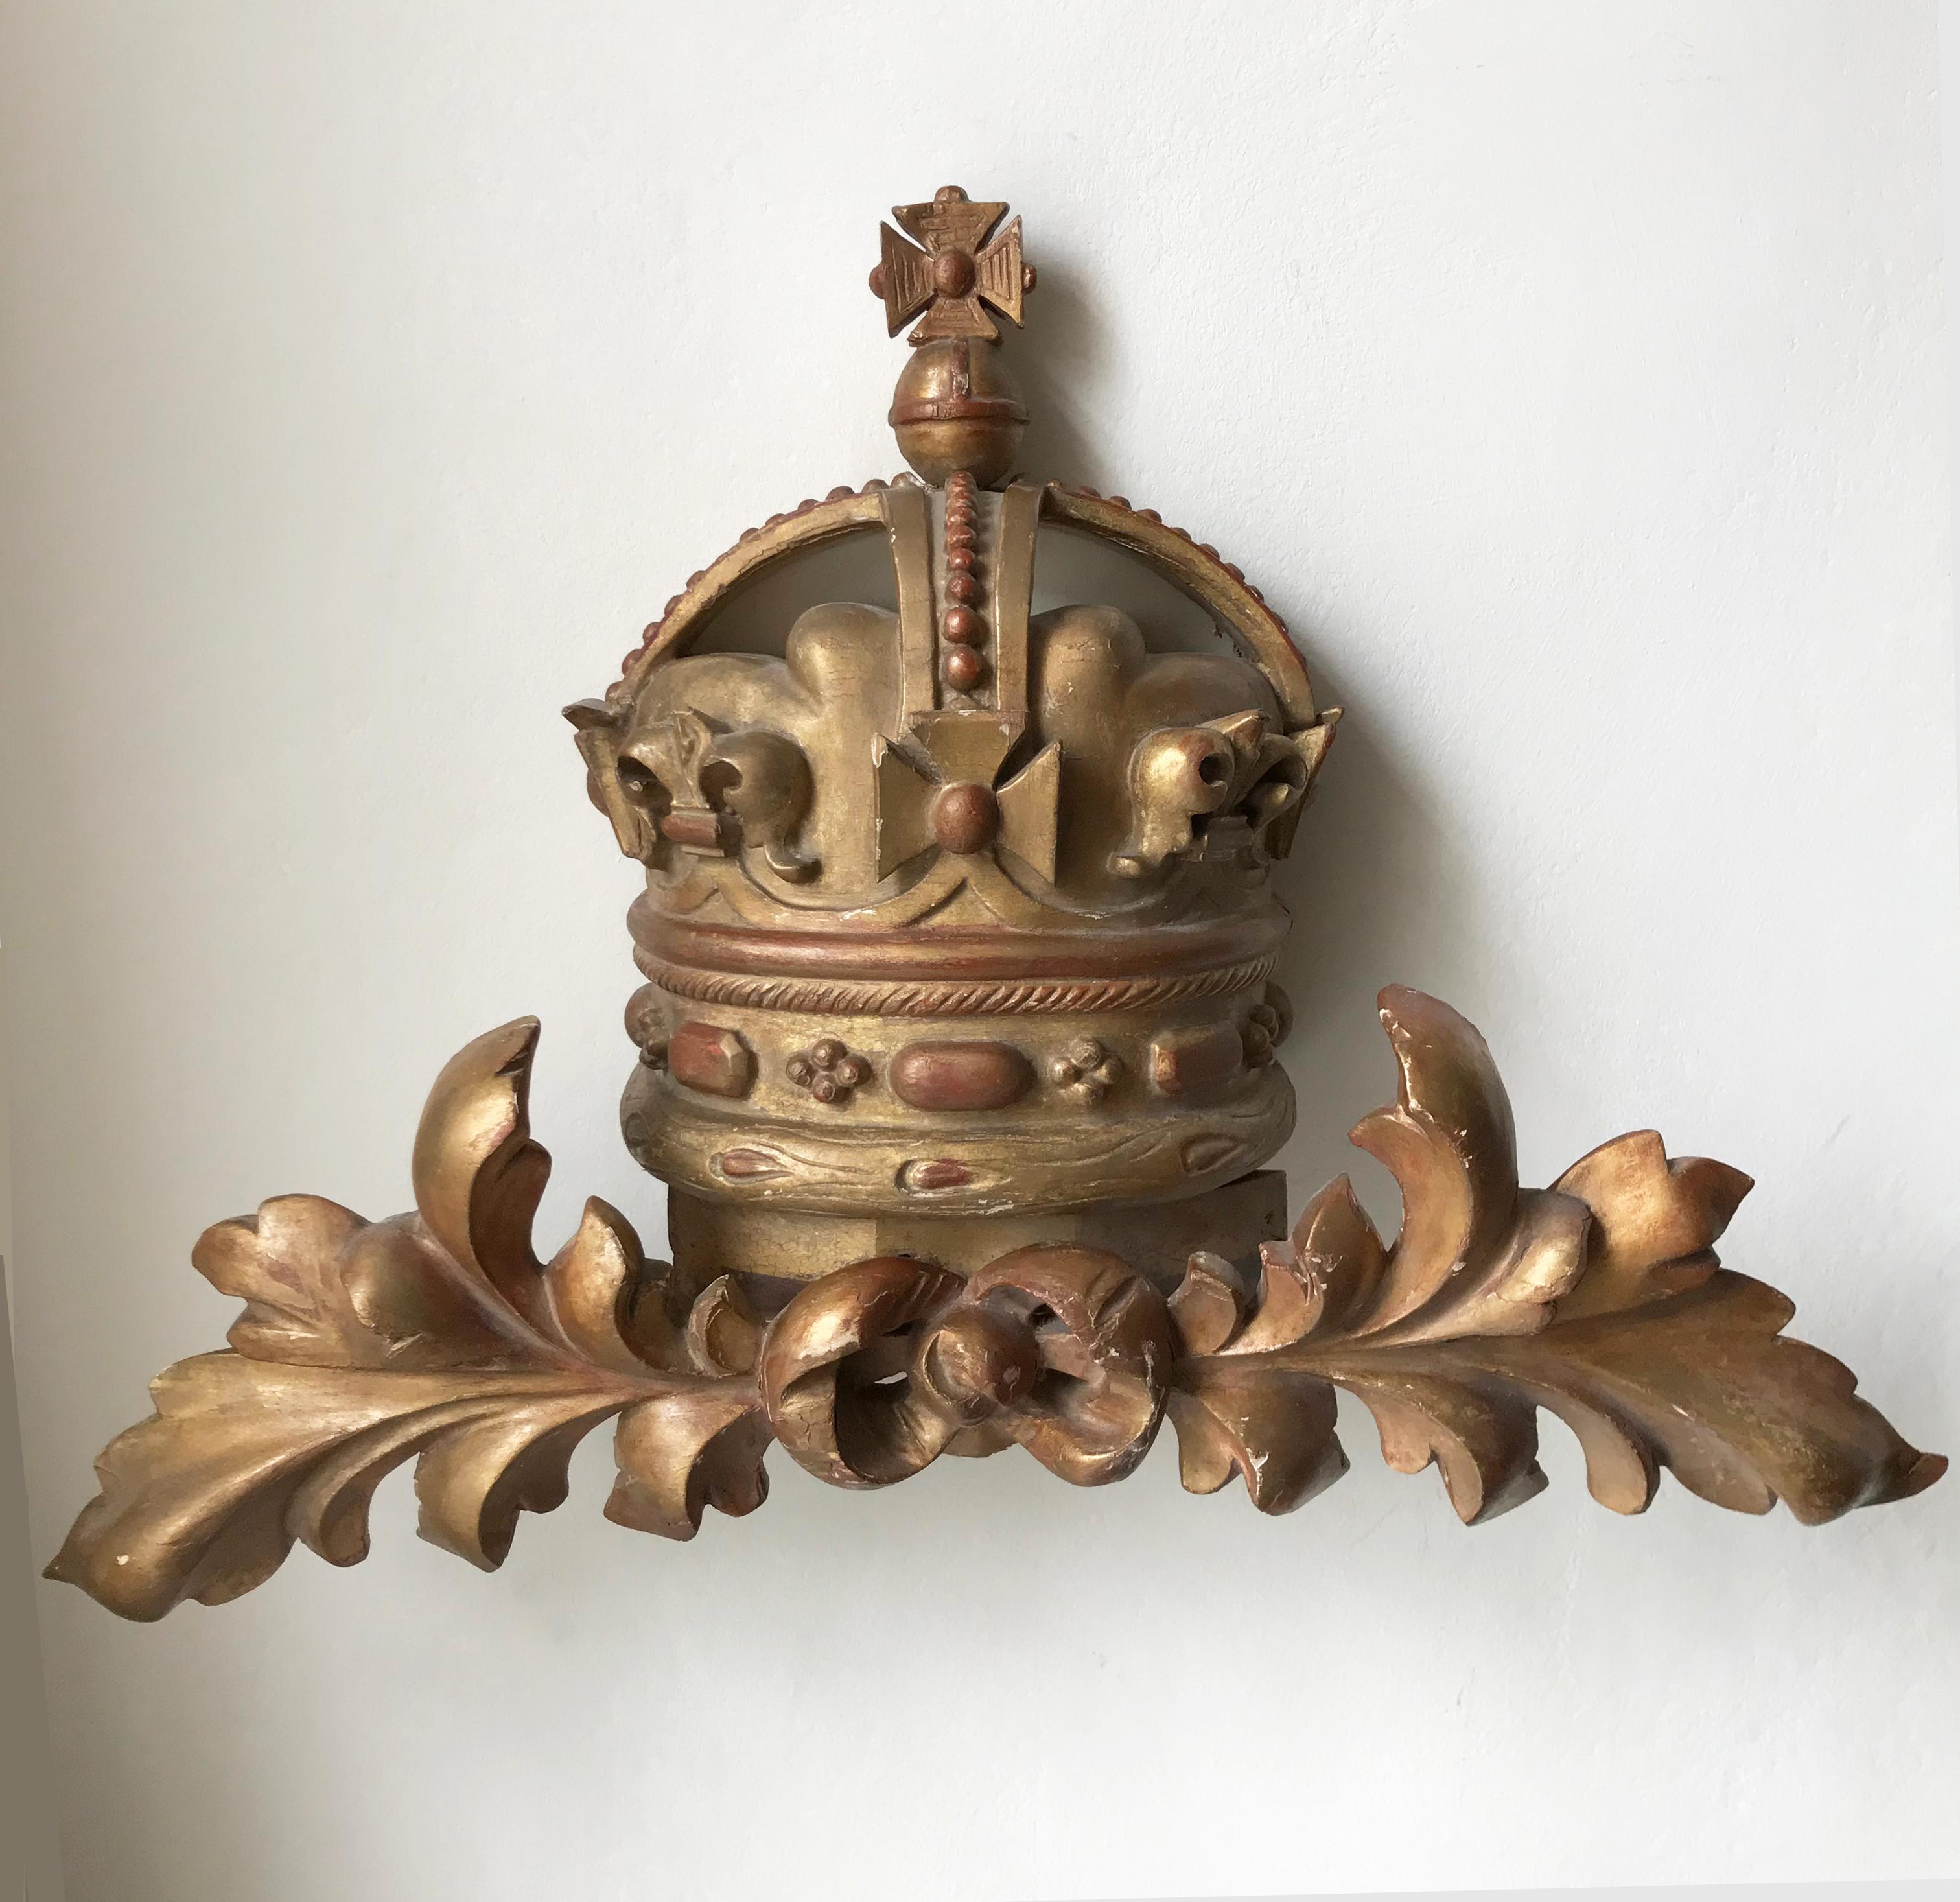 A very decorative carved pine parcel gilt grown. Most probably from a larger armorial.

In very nice condition with excellent detailing, retaining the majority of its original finish.

The King's crown points to it being from the reign of Edward